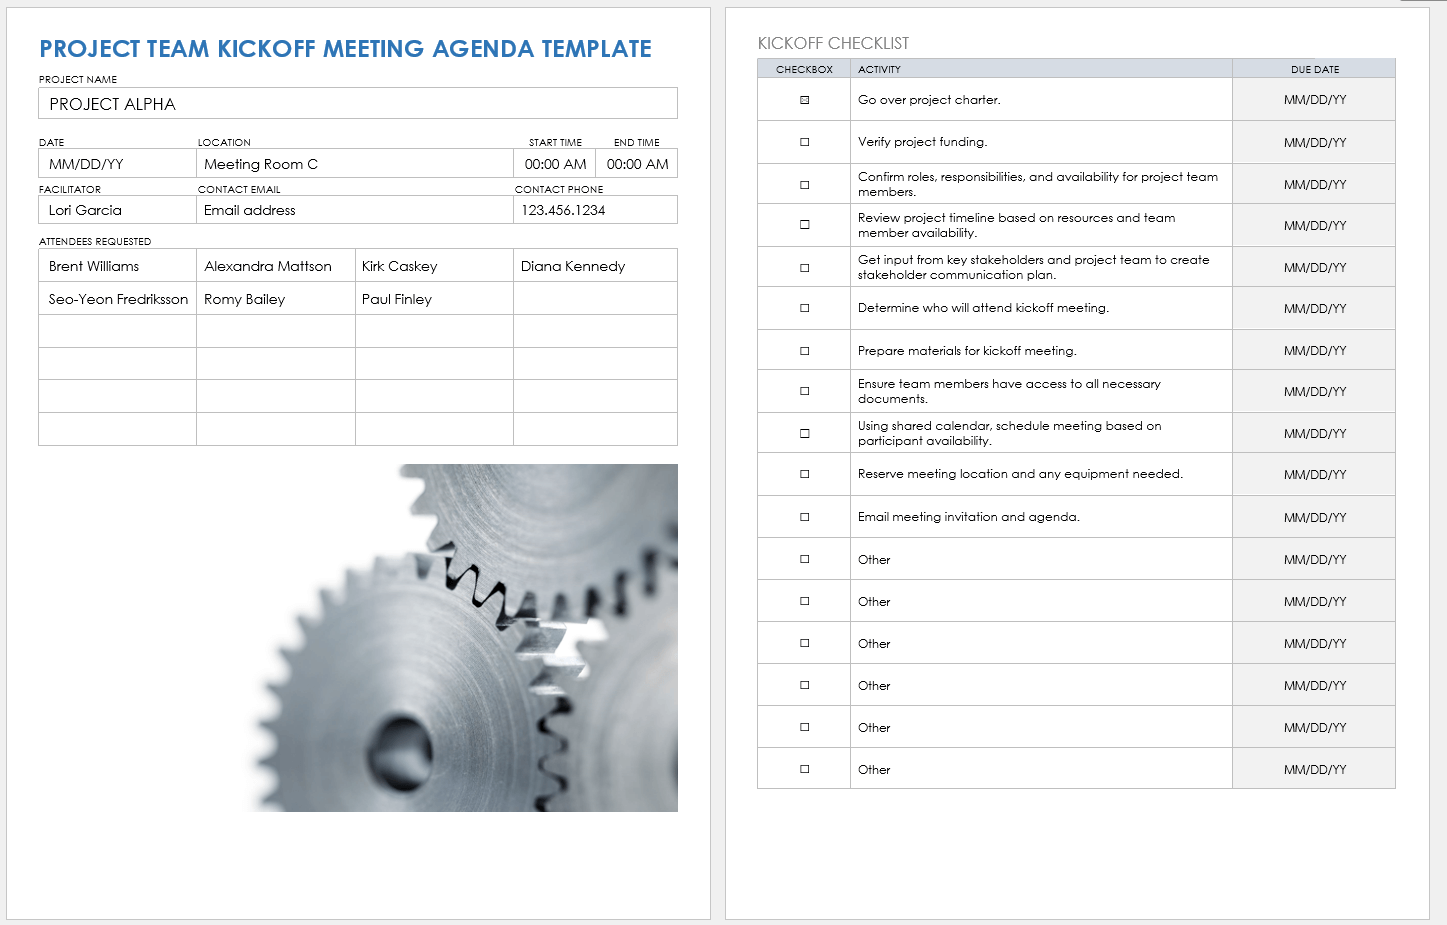 Project Team Kickoff Meeting Agenda Template